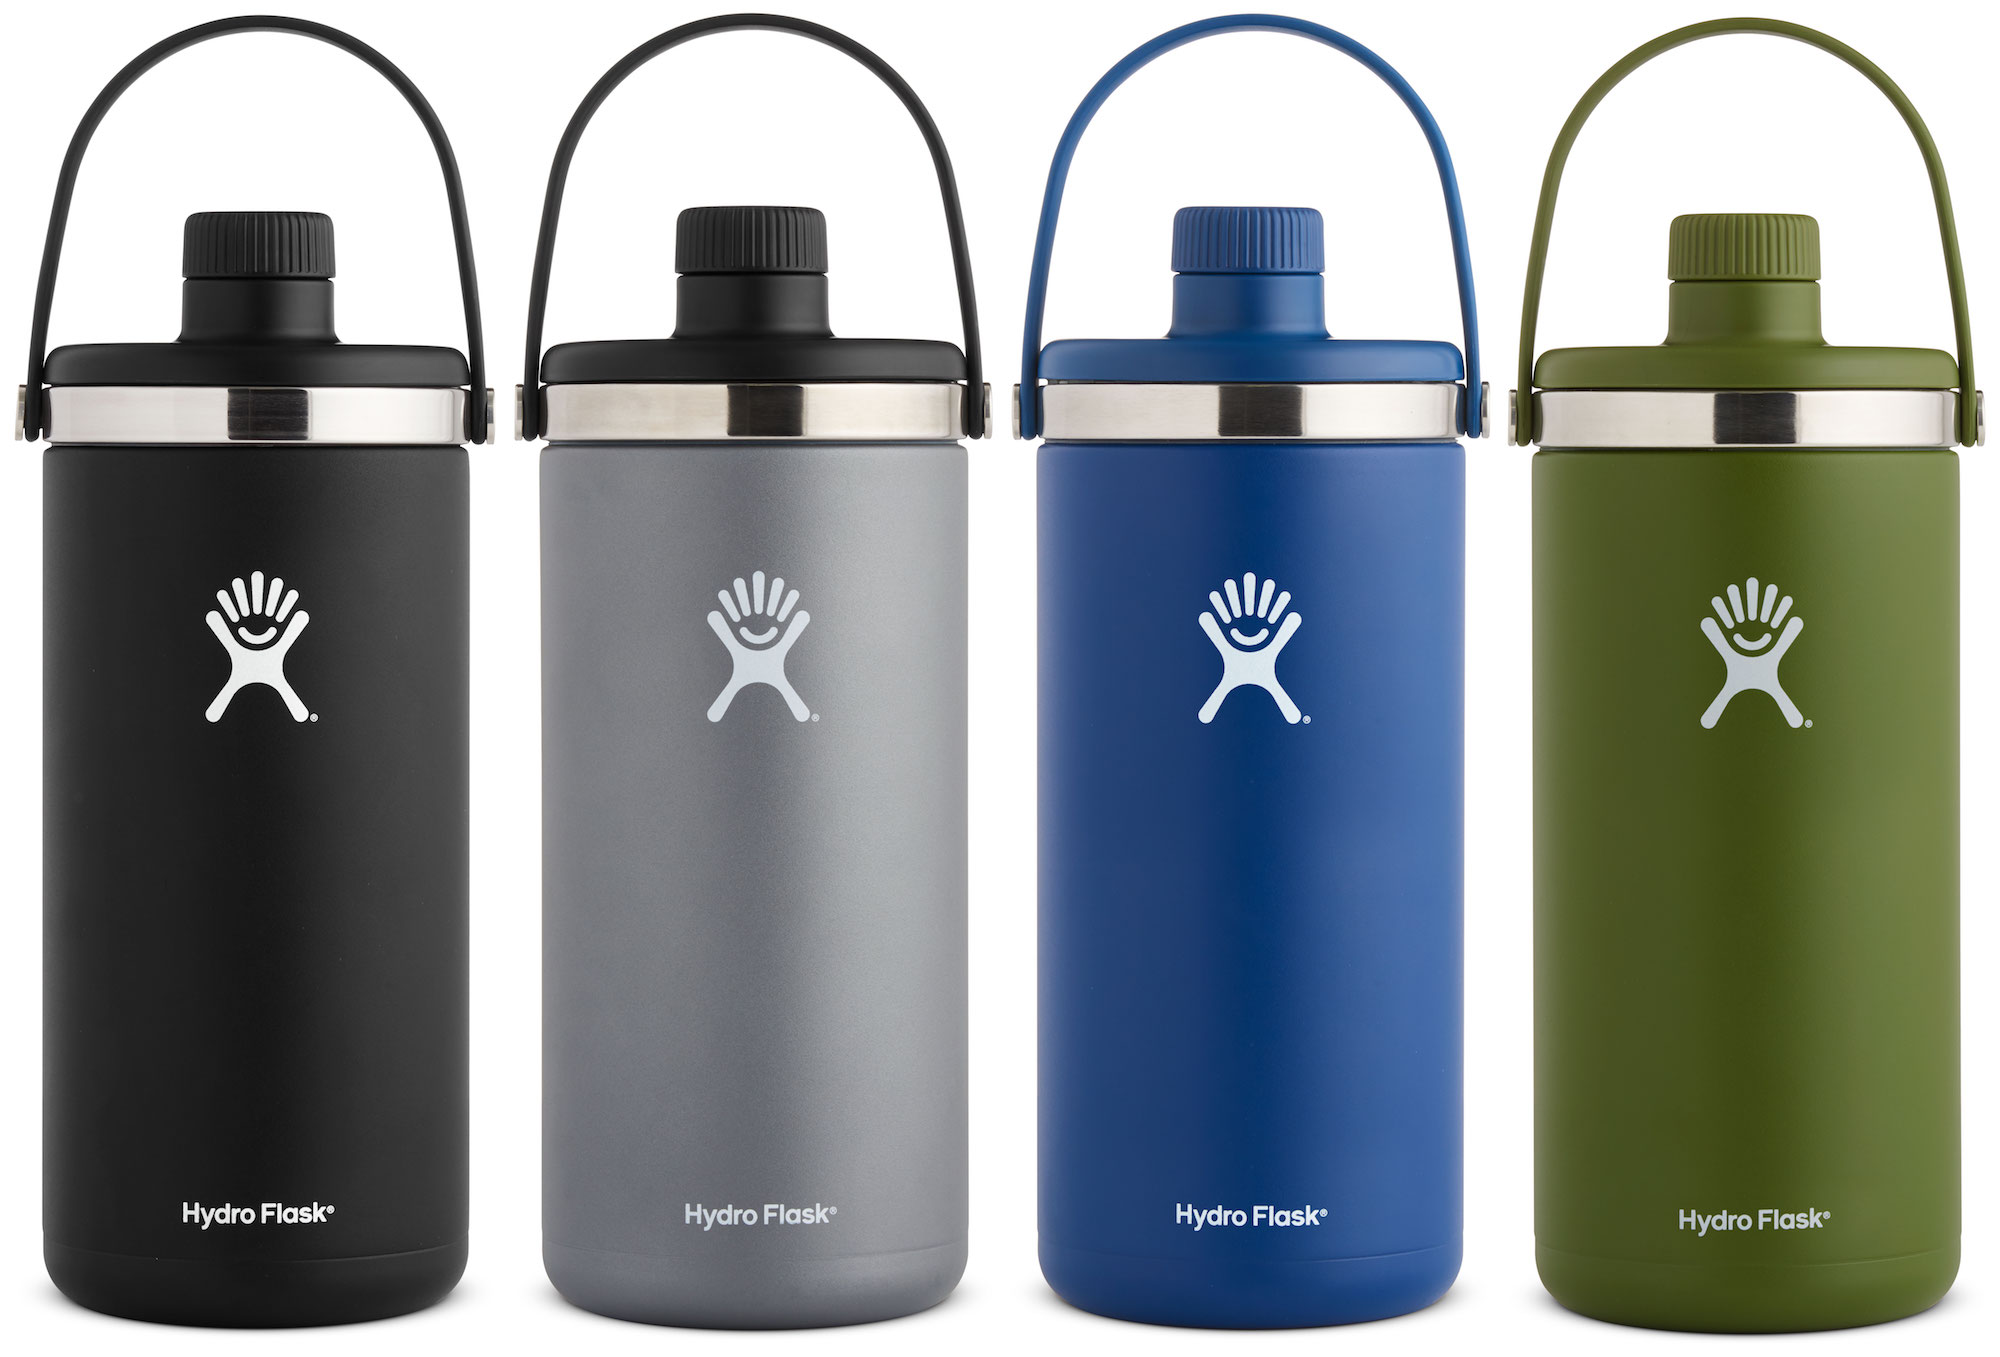 https://www.outdoorsportswire.com/wp-content/uploads/2017/07/Hydro-Flask-Oasis-128-Product-Collection.jpg